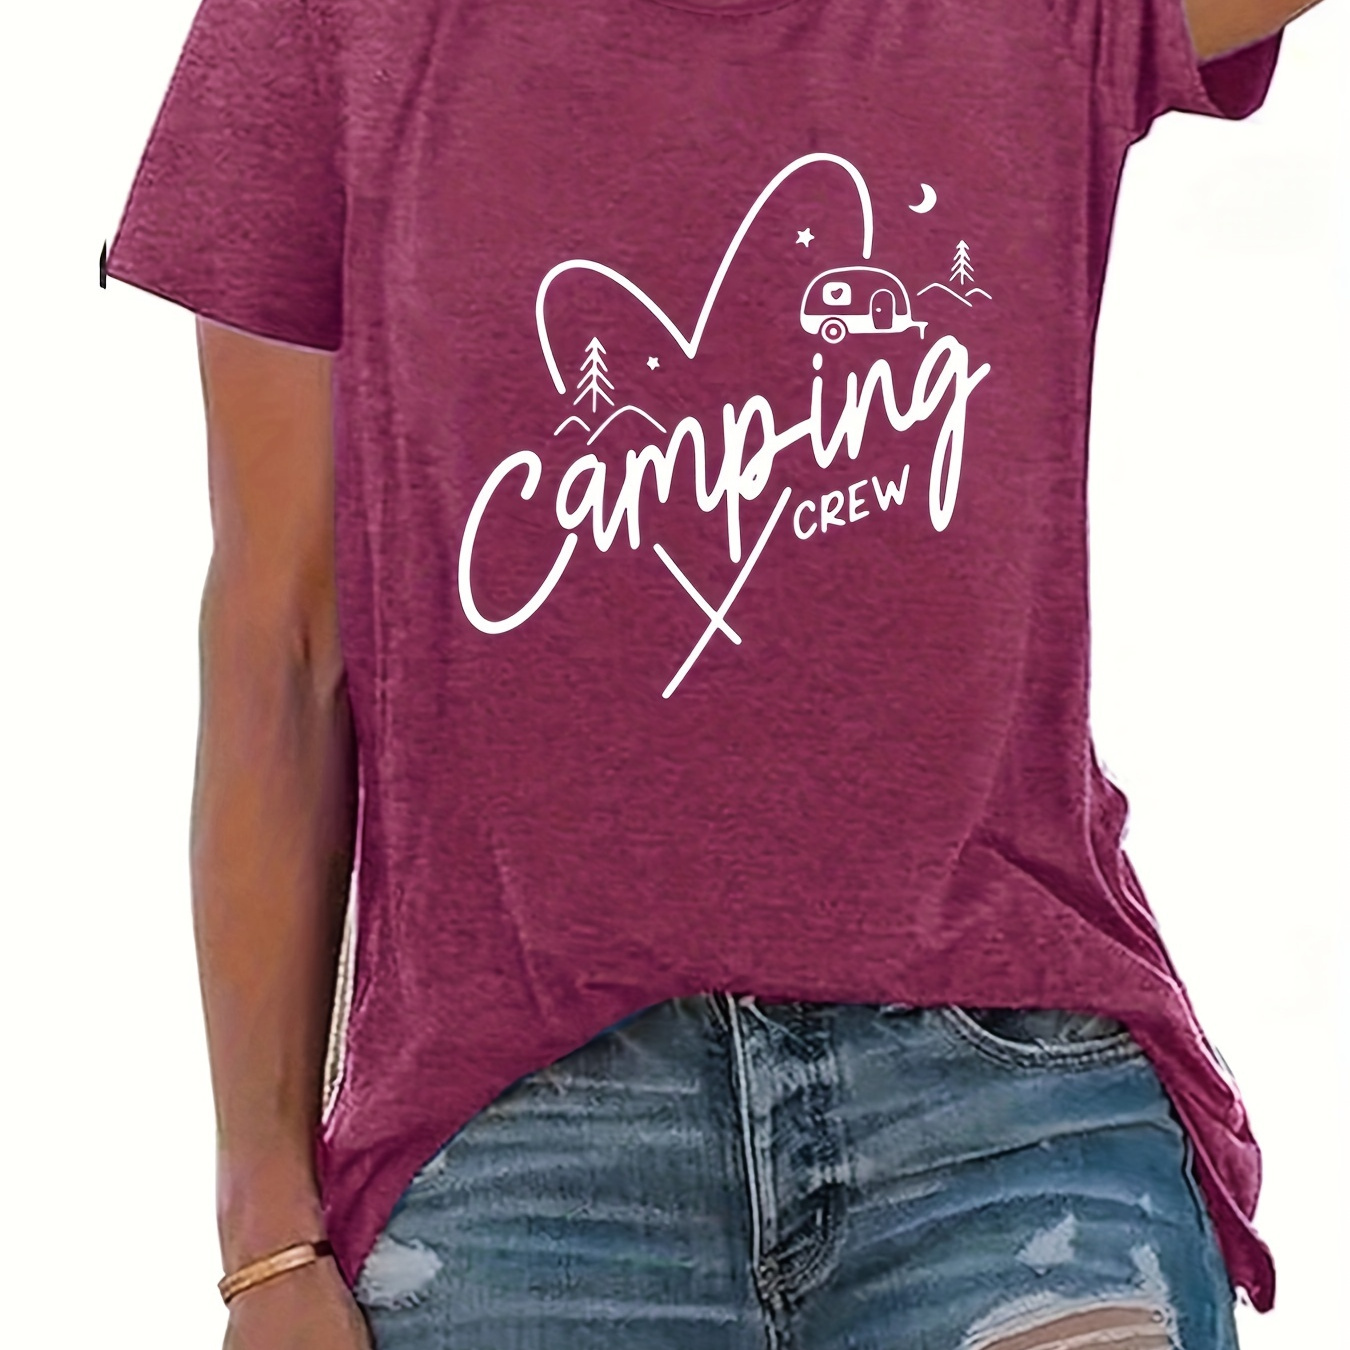 

Camping Crew Print T-shirt, Short Sleeve Crew Neck Casual Top For Summer & Spring, Women's Clothing